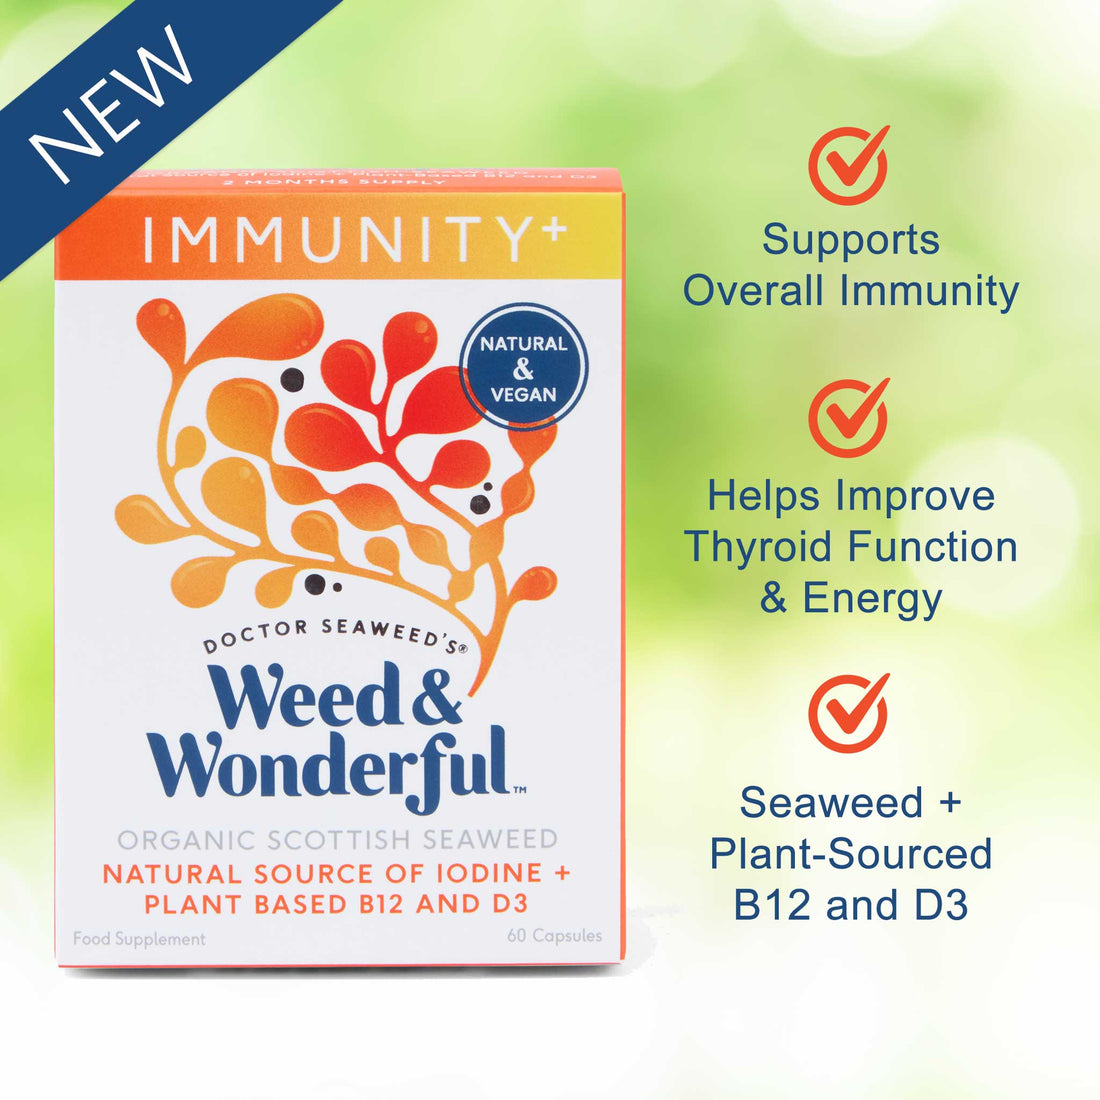 Introducing our NEW Immunity+ Seaweed Capsules